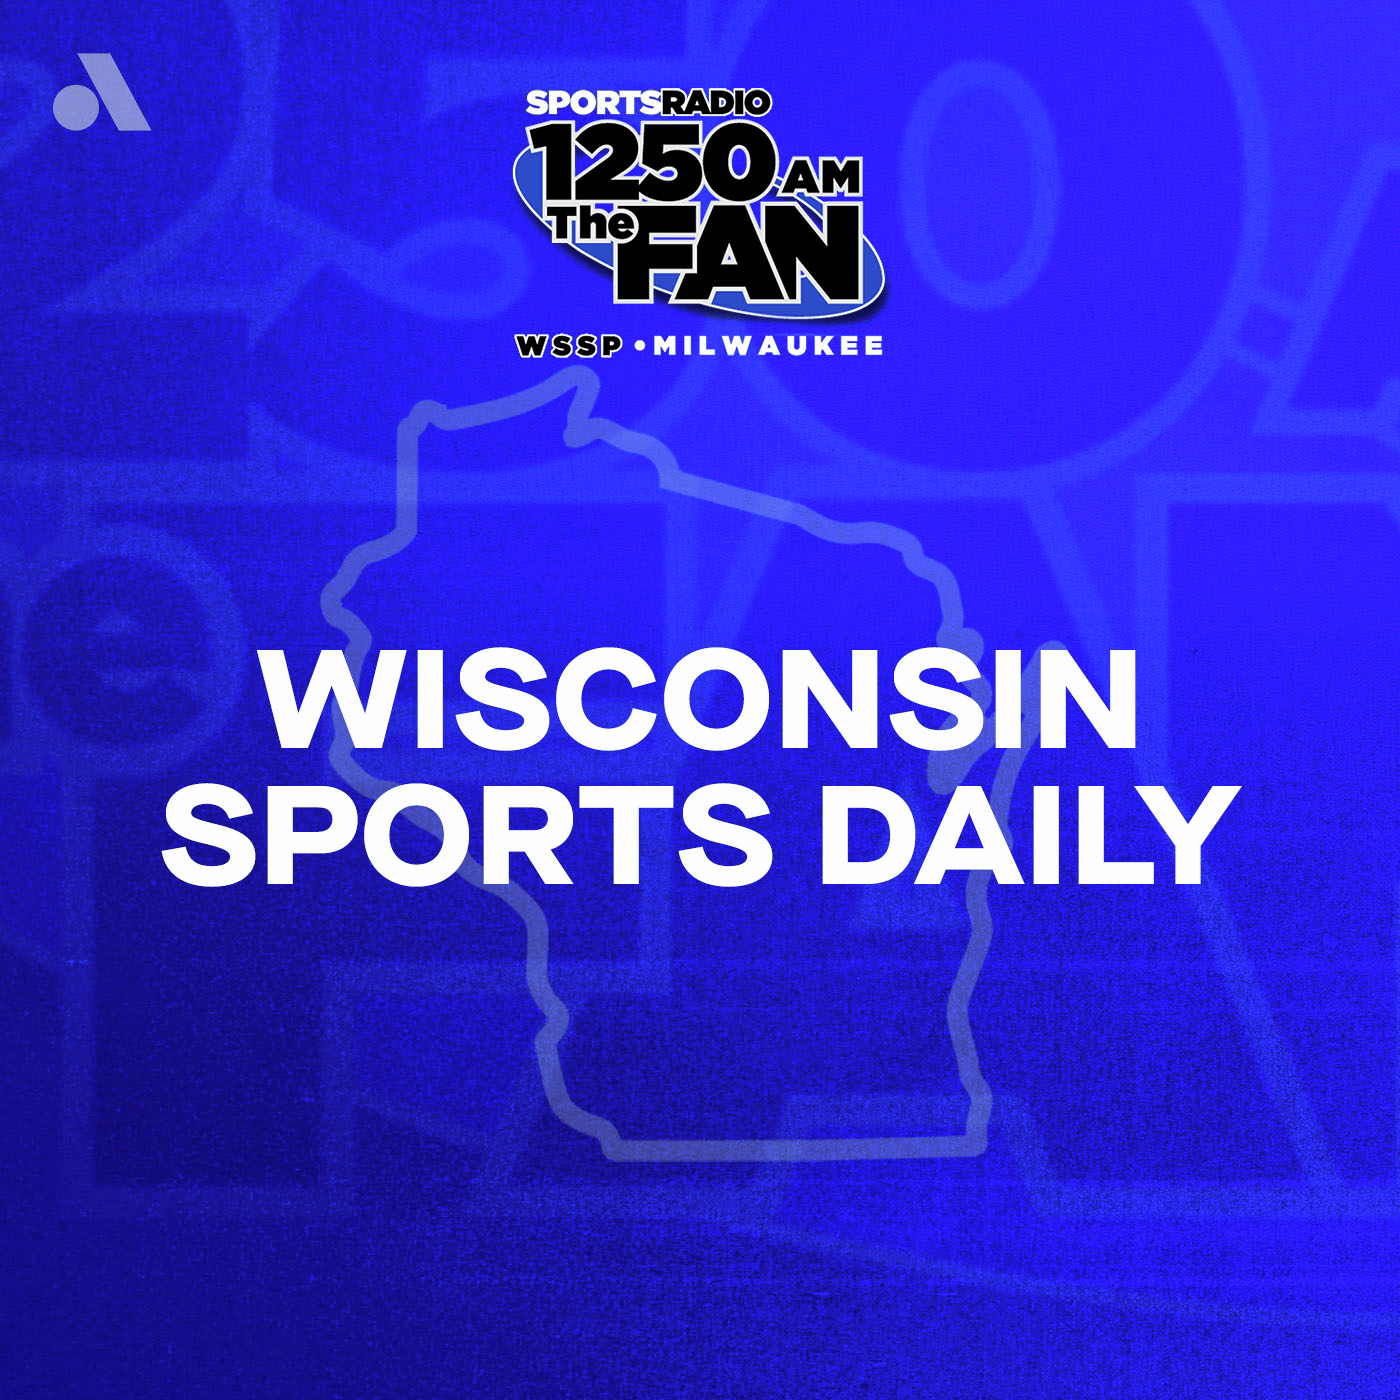 Thursday, May 23rd: Second Hour of Wisconsin Sports Daily- Jim Owczarski of the Milwaukee Journal Sentinel Joins Wisconsin Sports Daily!